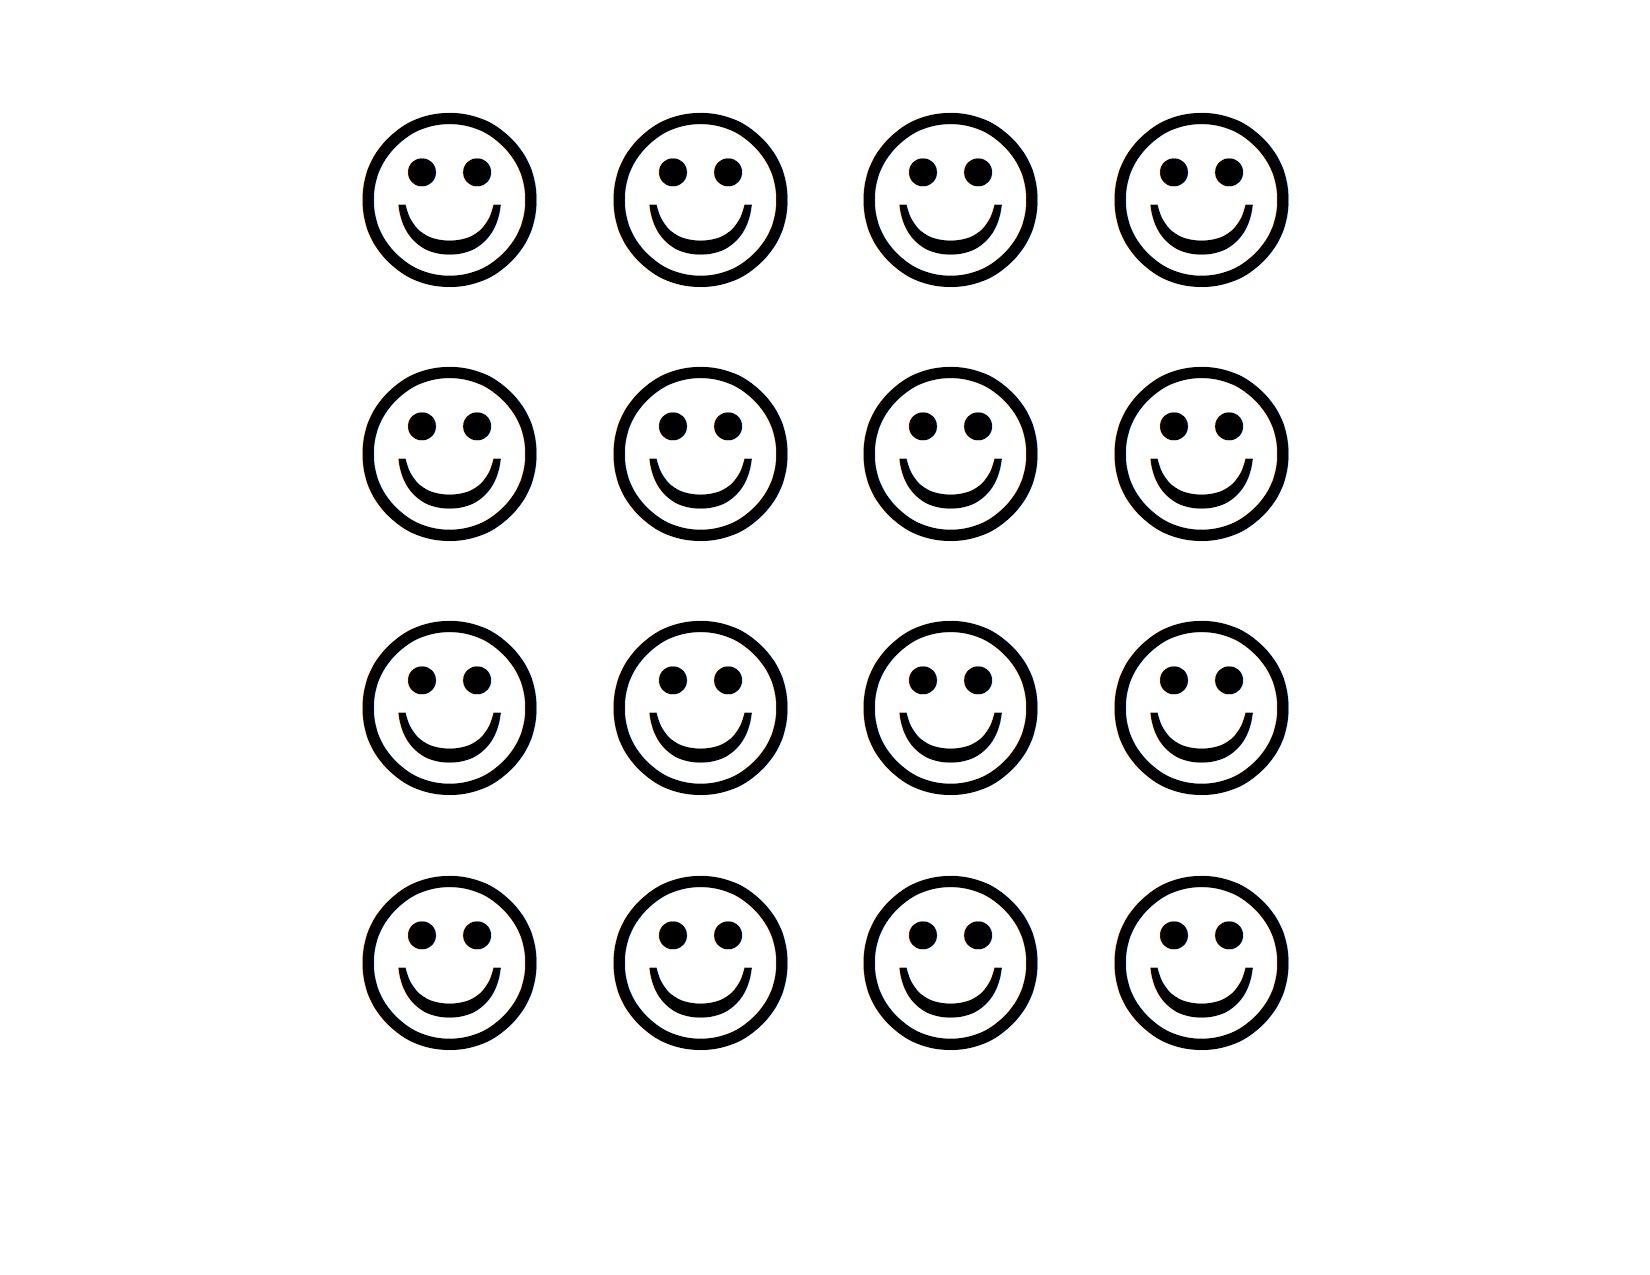 16 smiley faces arranged in four rows of four.